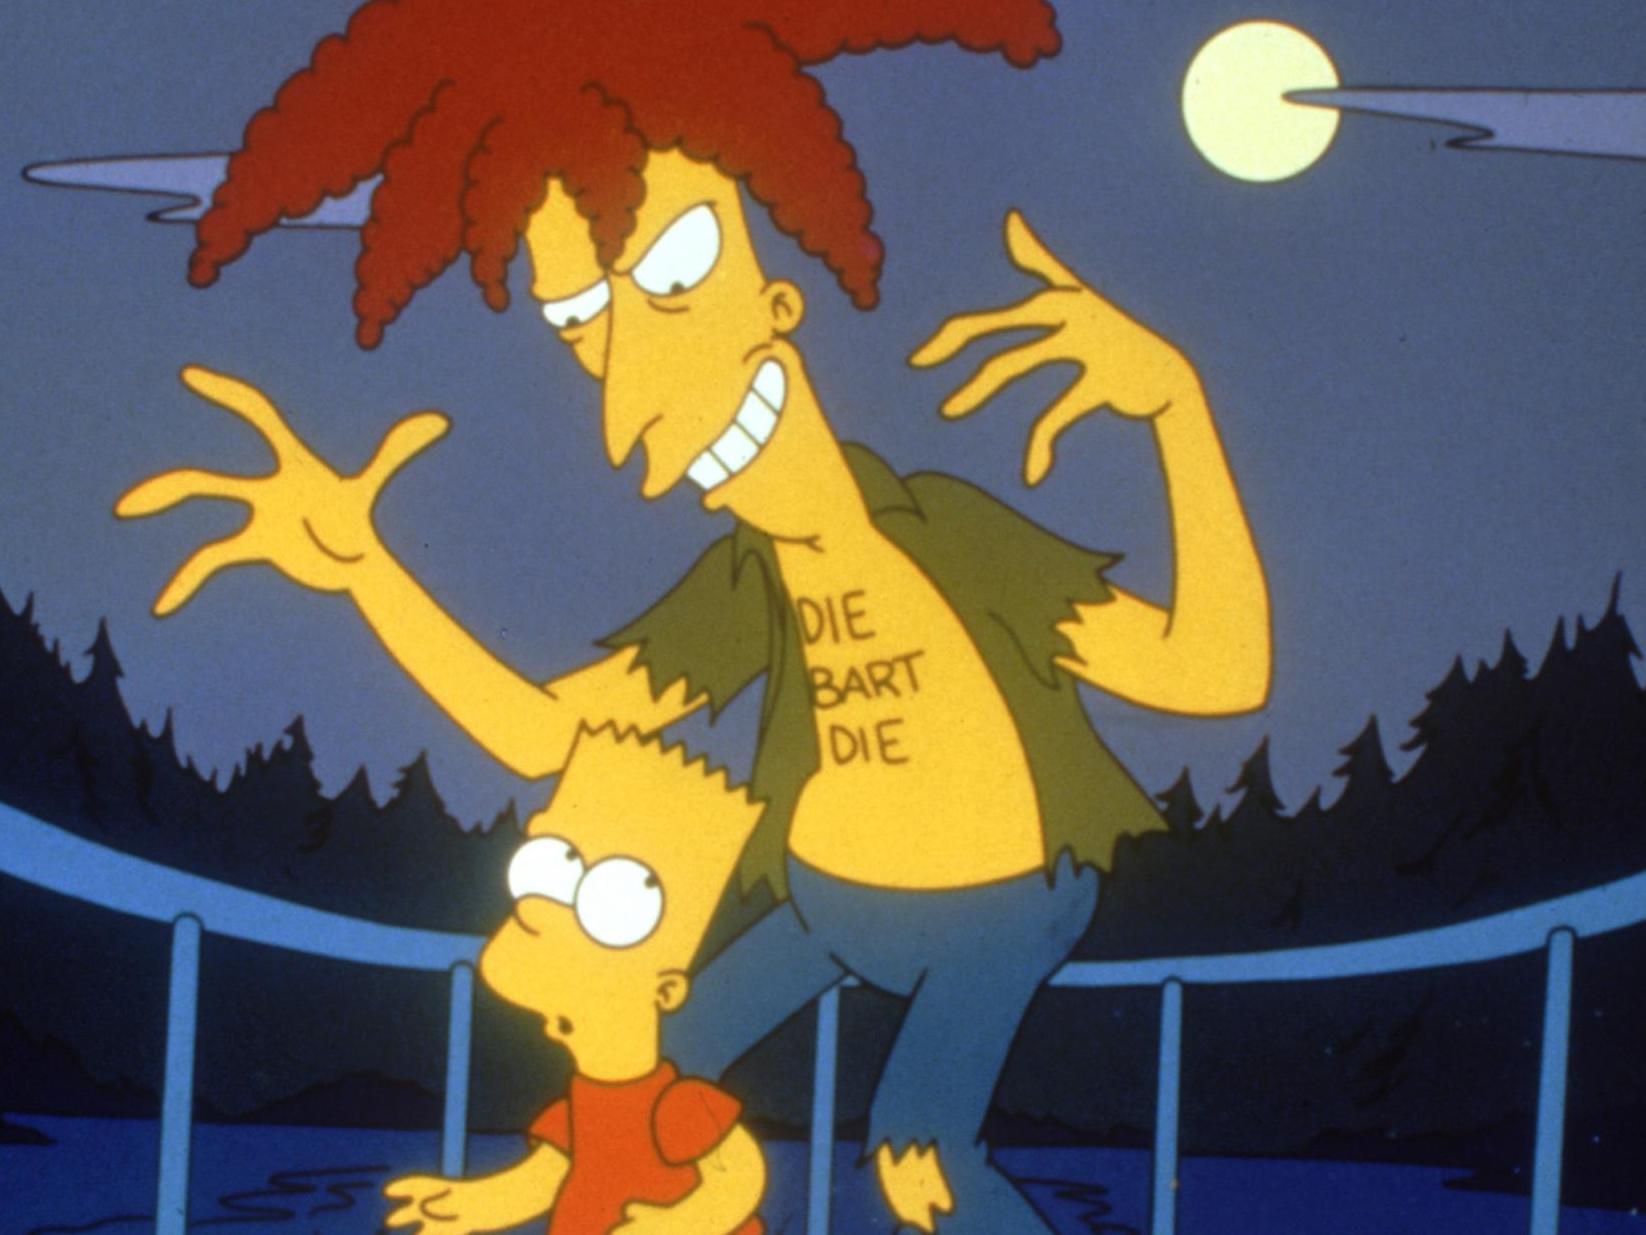 Sideshow Bob was a favourite of Simpsons fans from his very first appearance, in 1990's 'Krusty Gets Busted'